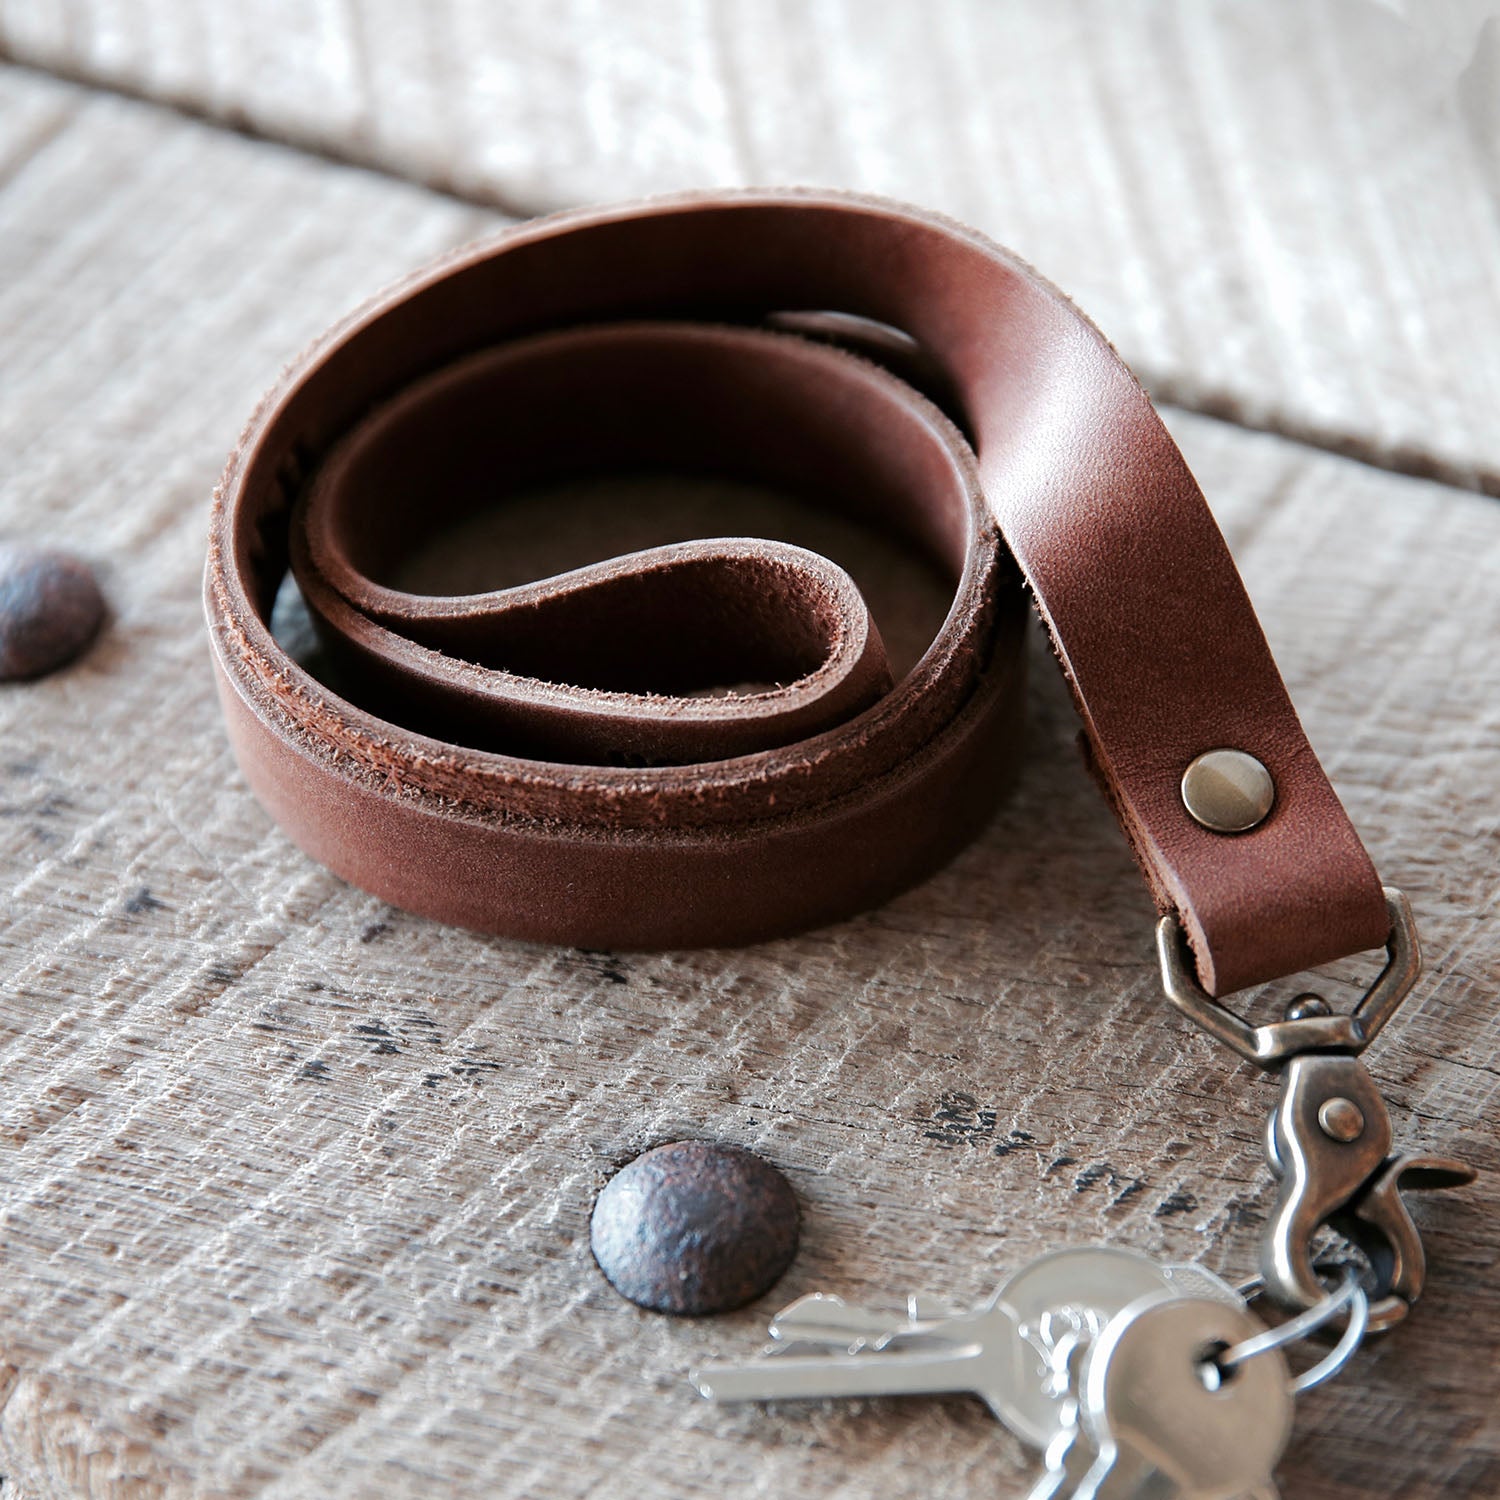 Full-Grain Leather Phone Pouch with Lanyard